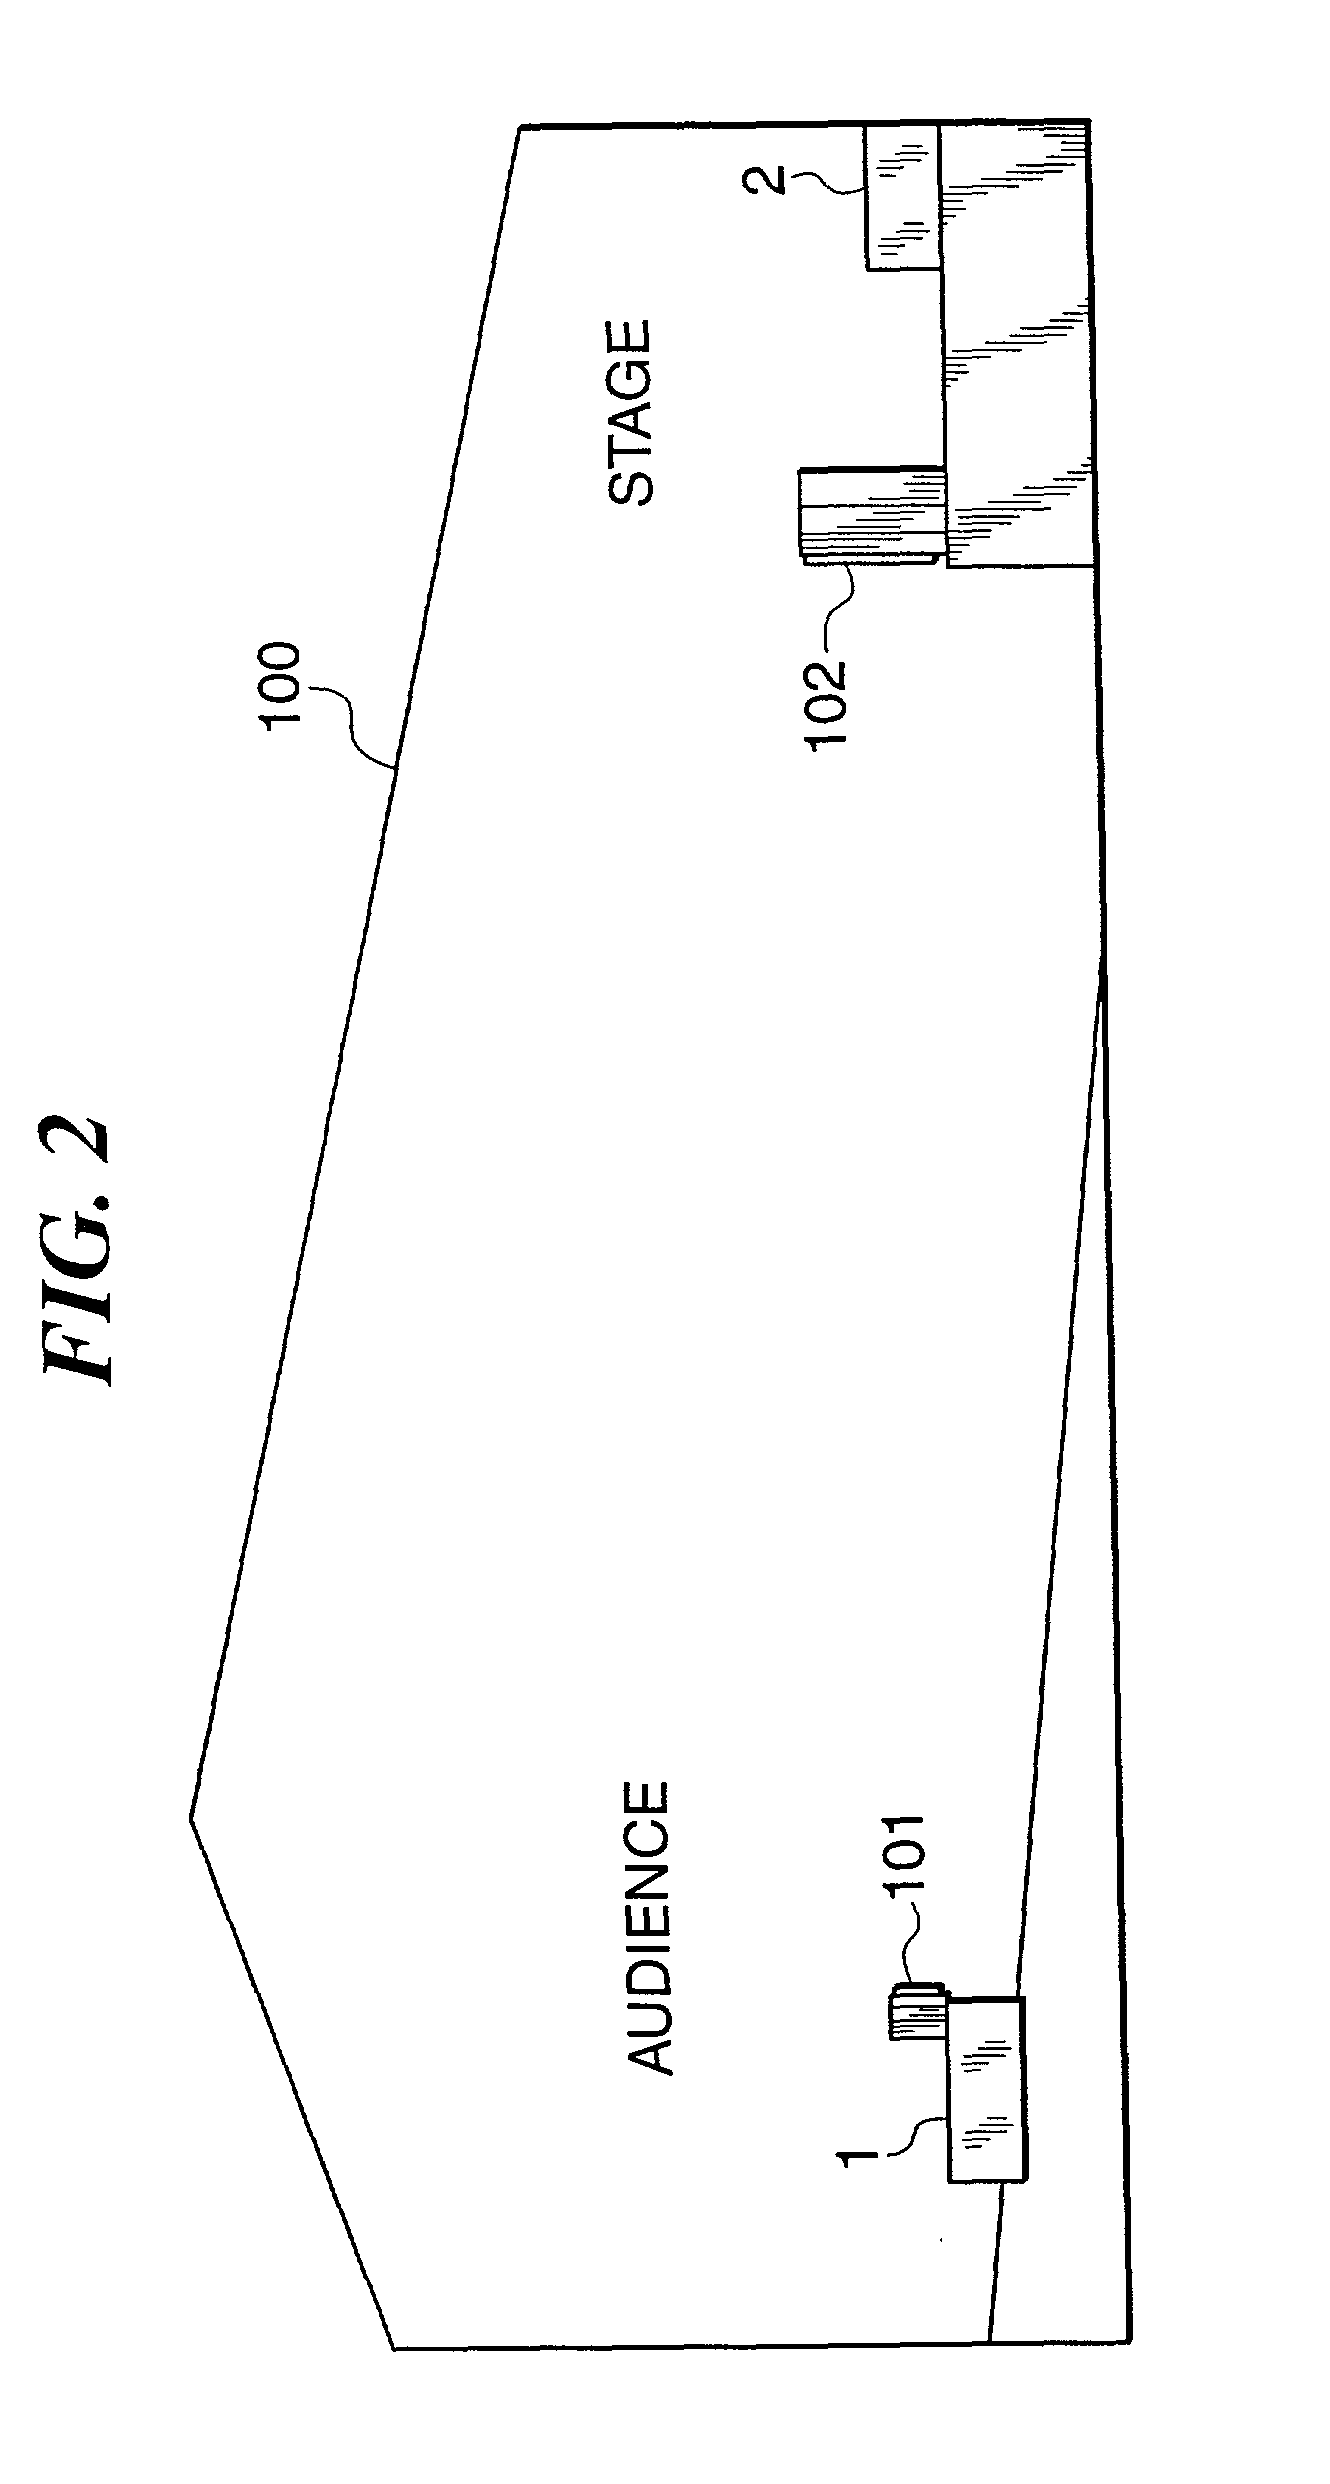 Digital mixing system, engine apparatus, console apparatus, digital mixing method, engine apparatus control method, console apparatus control method, and programs executing these control methods